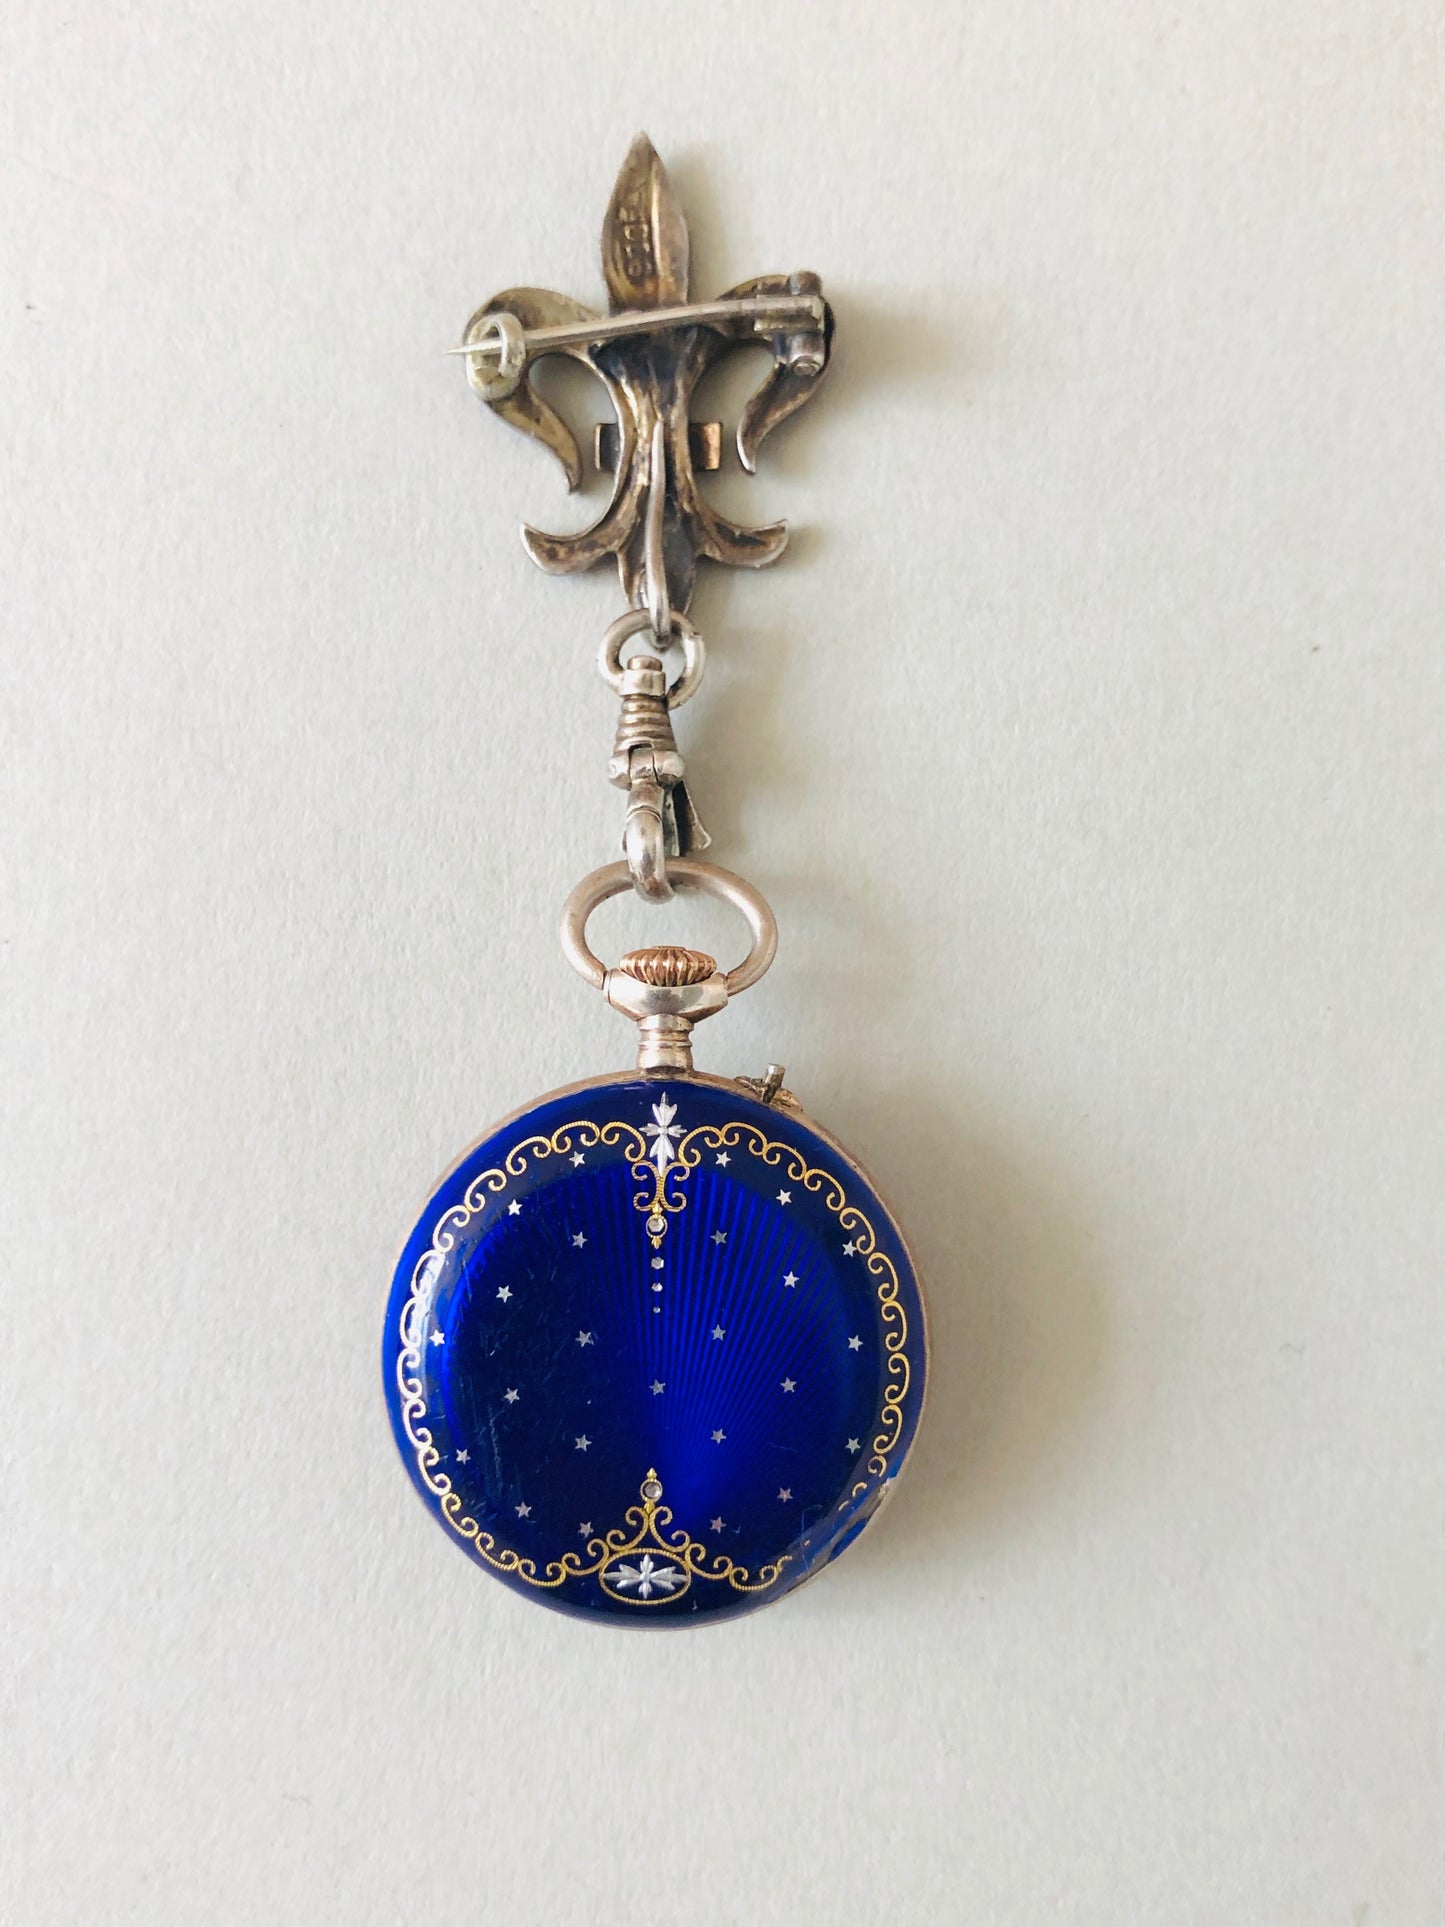 The Director Lucy - French Silver and Enamel Fob Watch